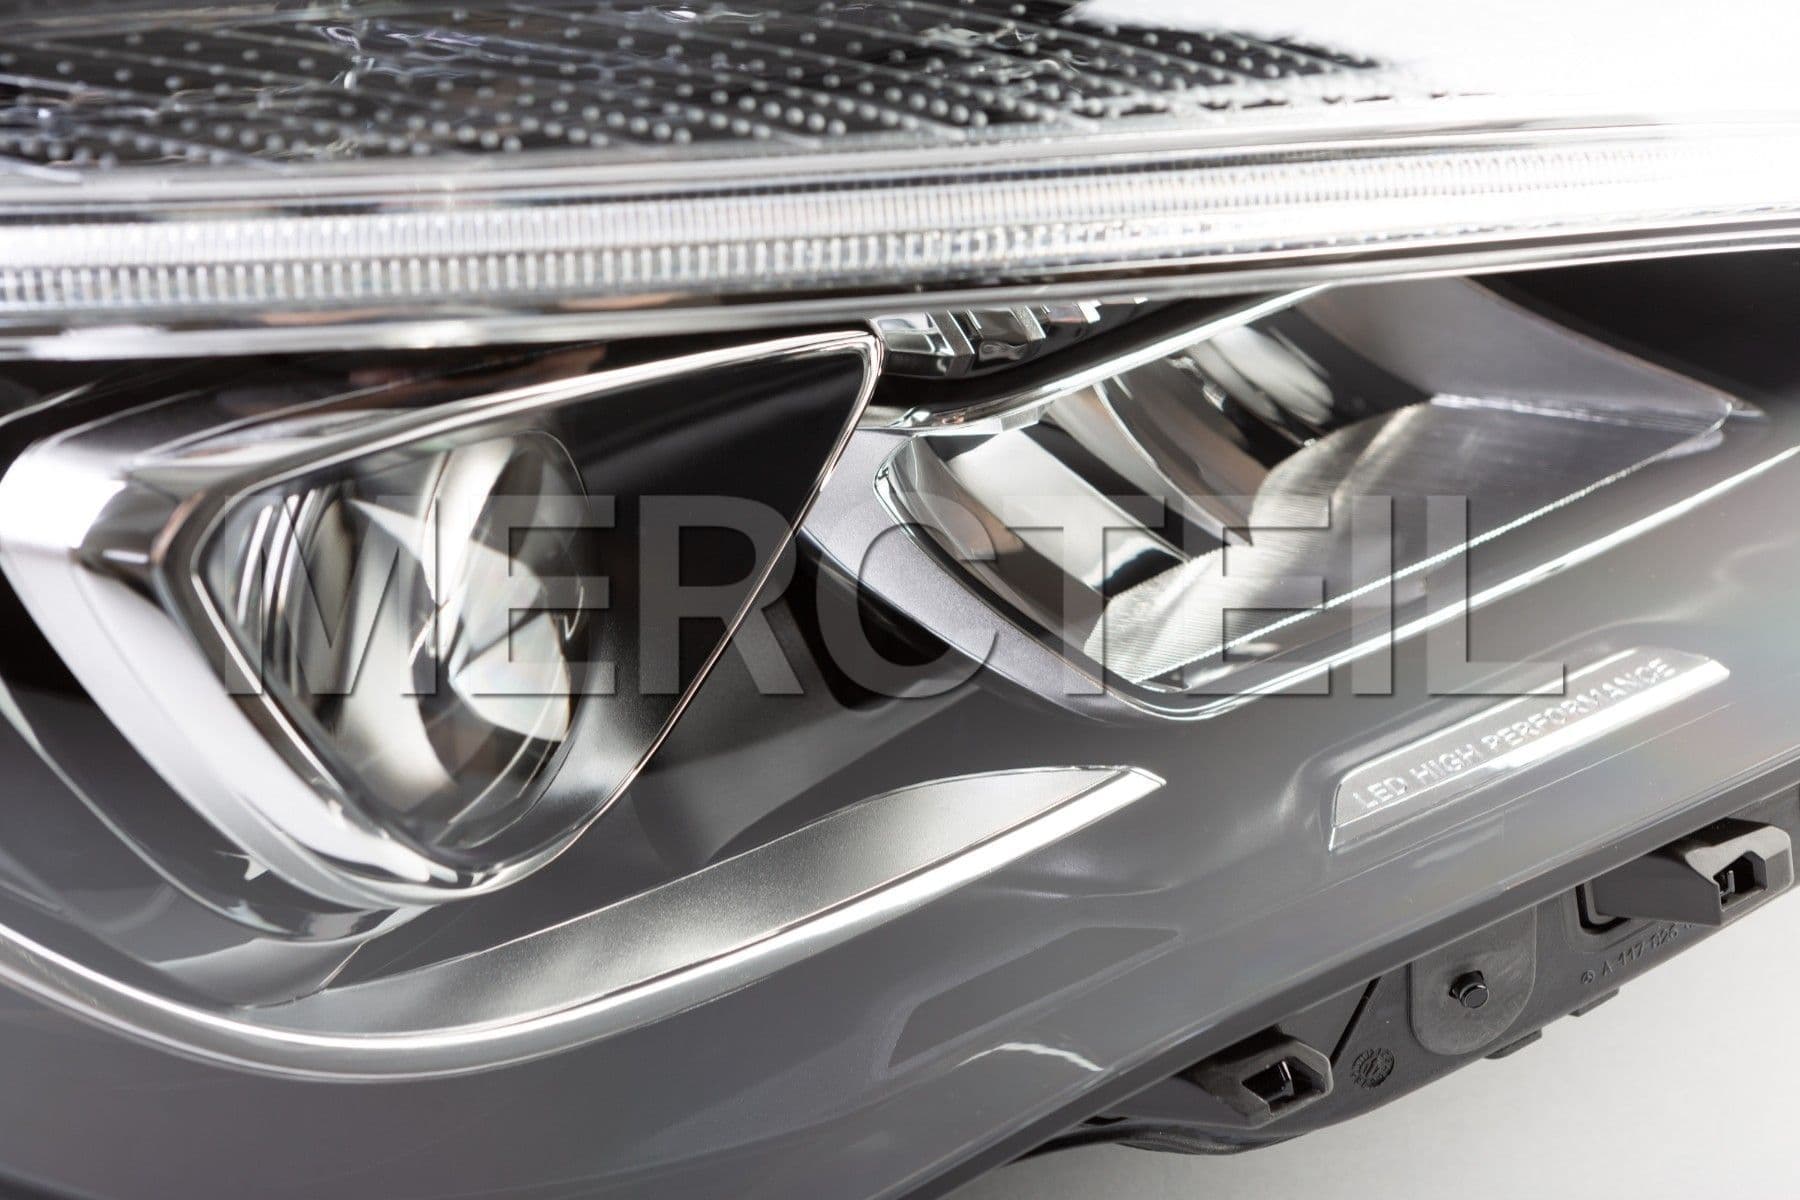 High Performance Dynamic RHD Headlights for CLA-Class (part number: 	
A1179067800)